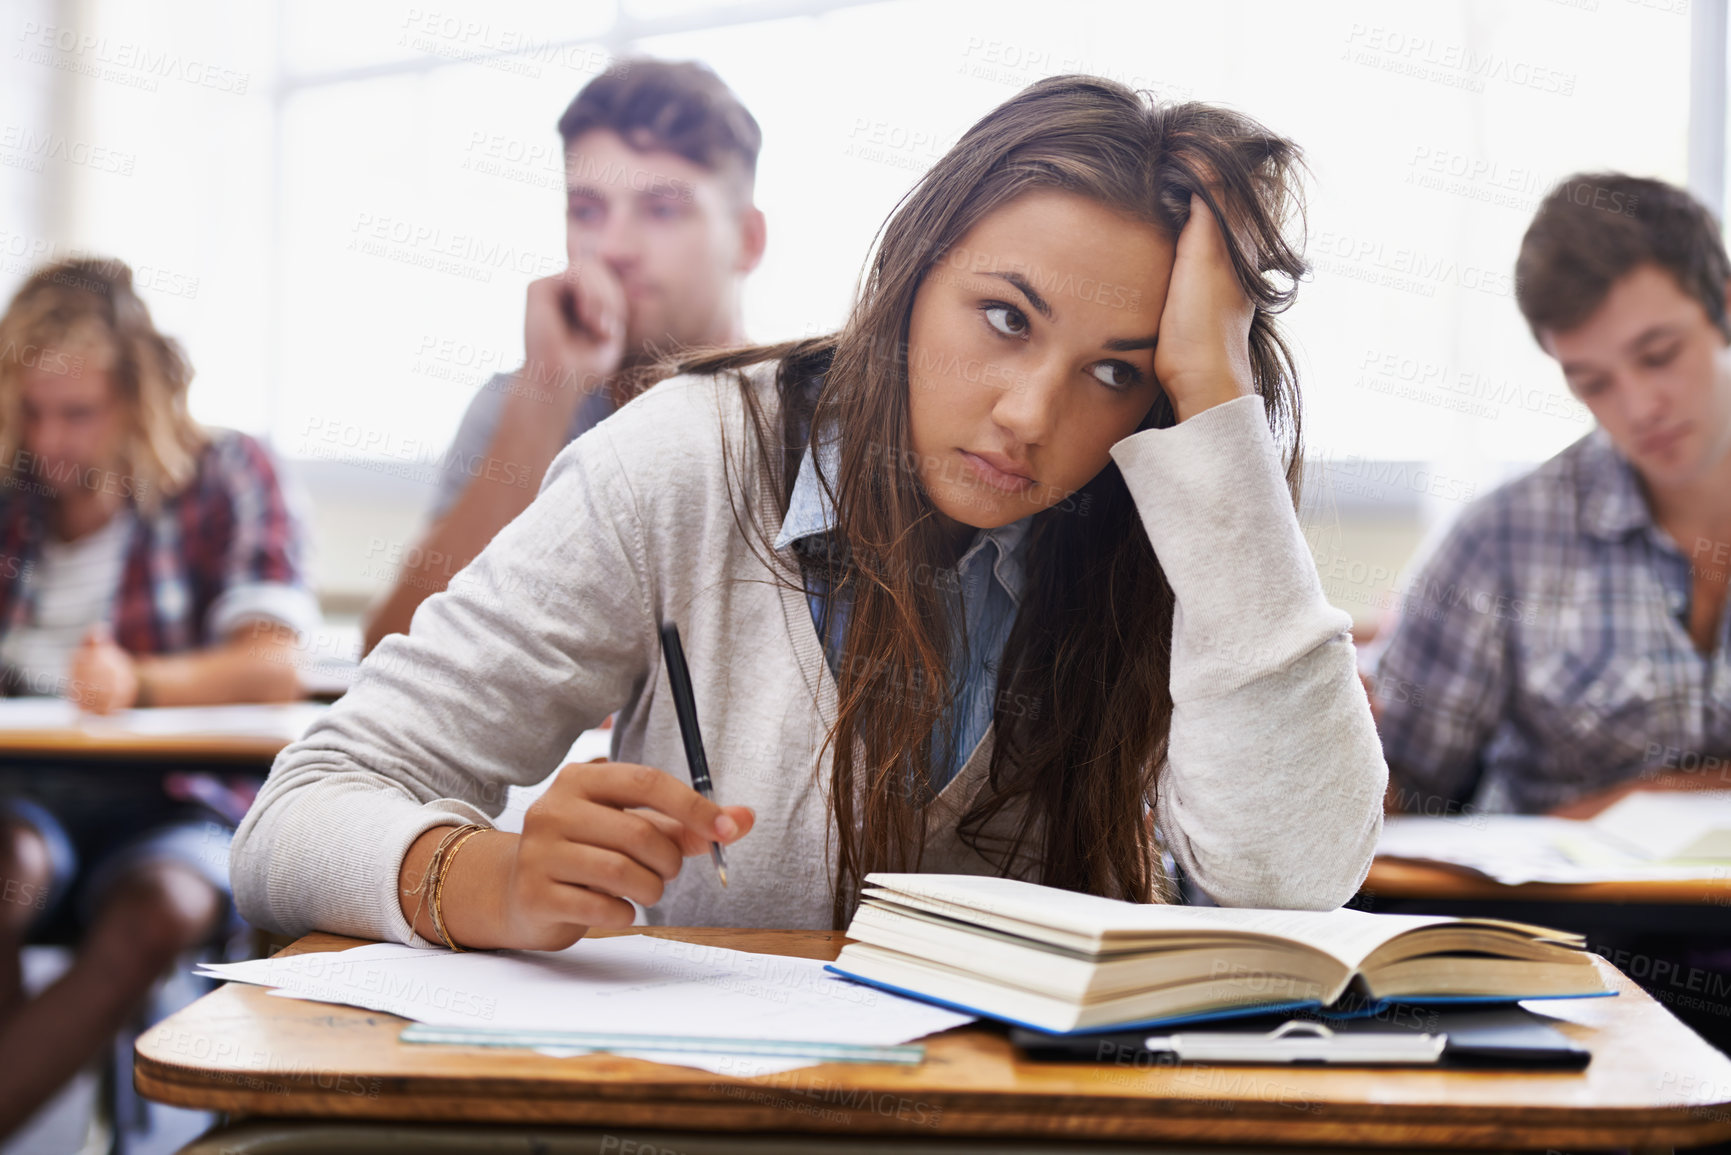 Buy stock photo An overworked young student sitting with her head in her hands